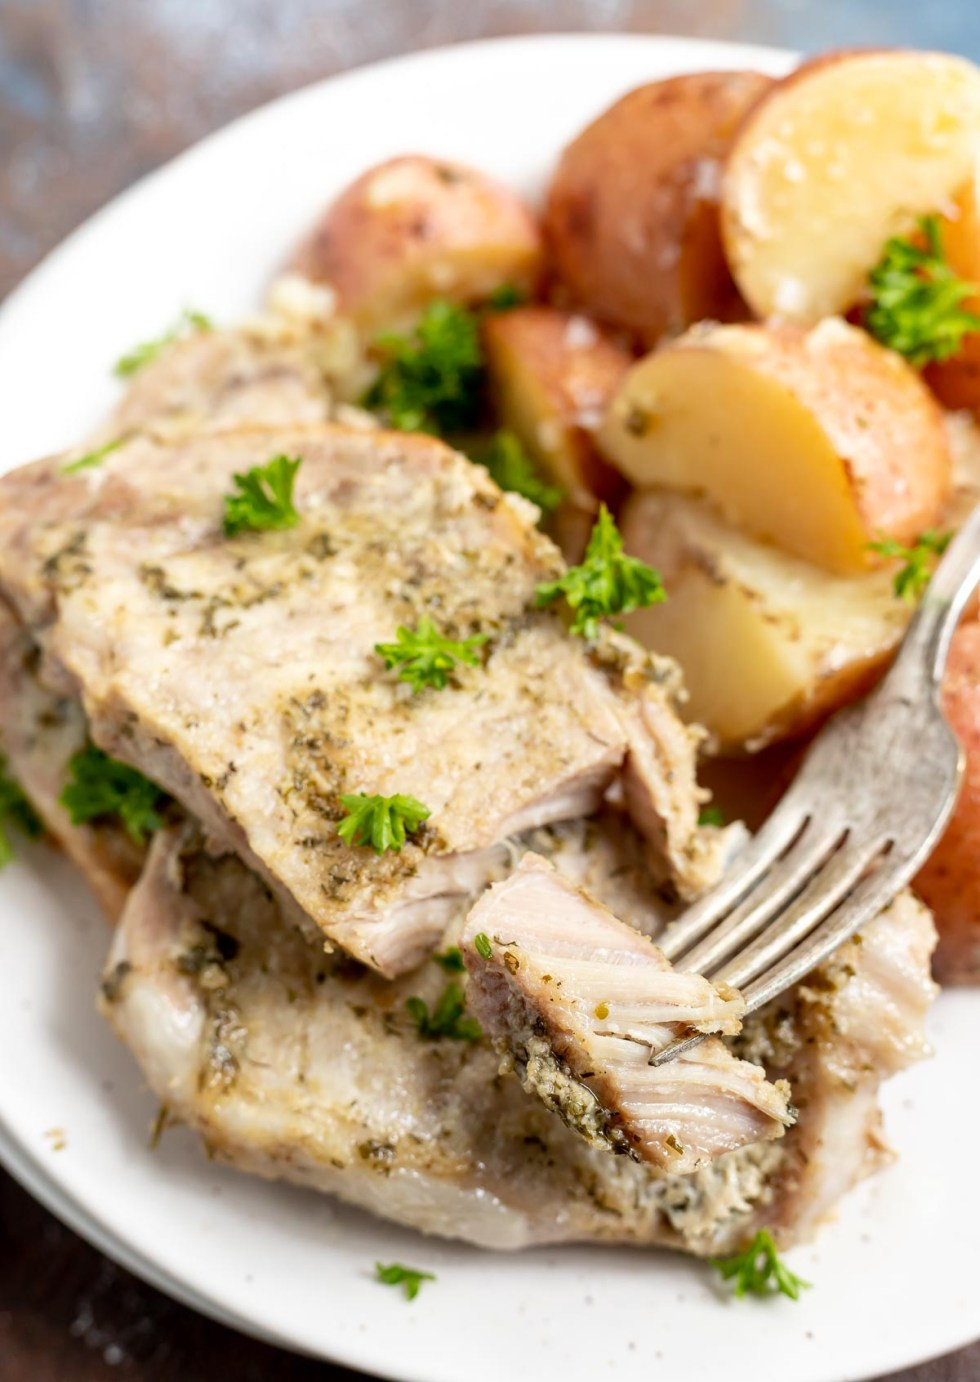 Pork Chops And Red Potatoes Slow Cooker
 CROCKPOT RANCH PORK CHOPS and POTATOES WonkyWonderful